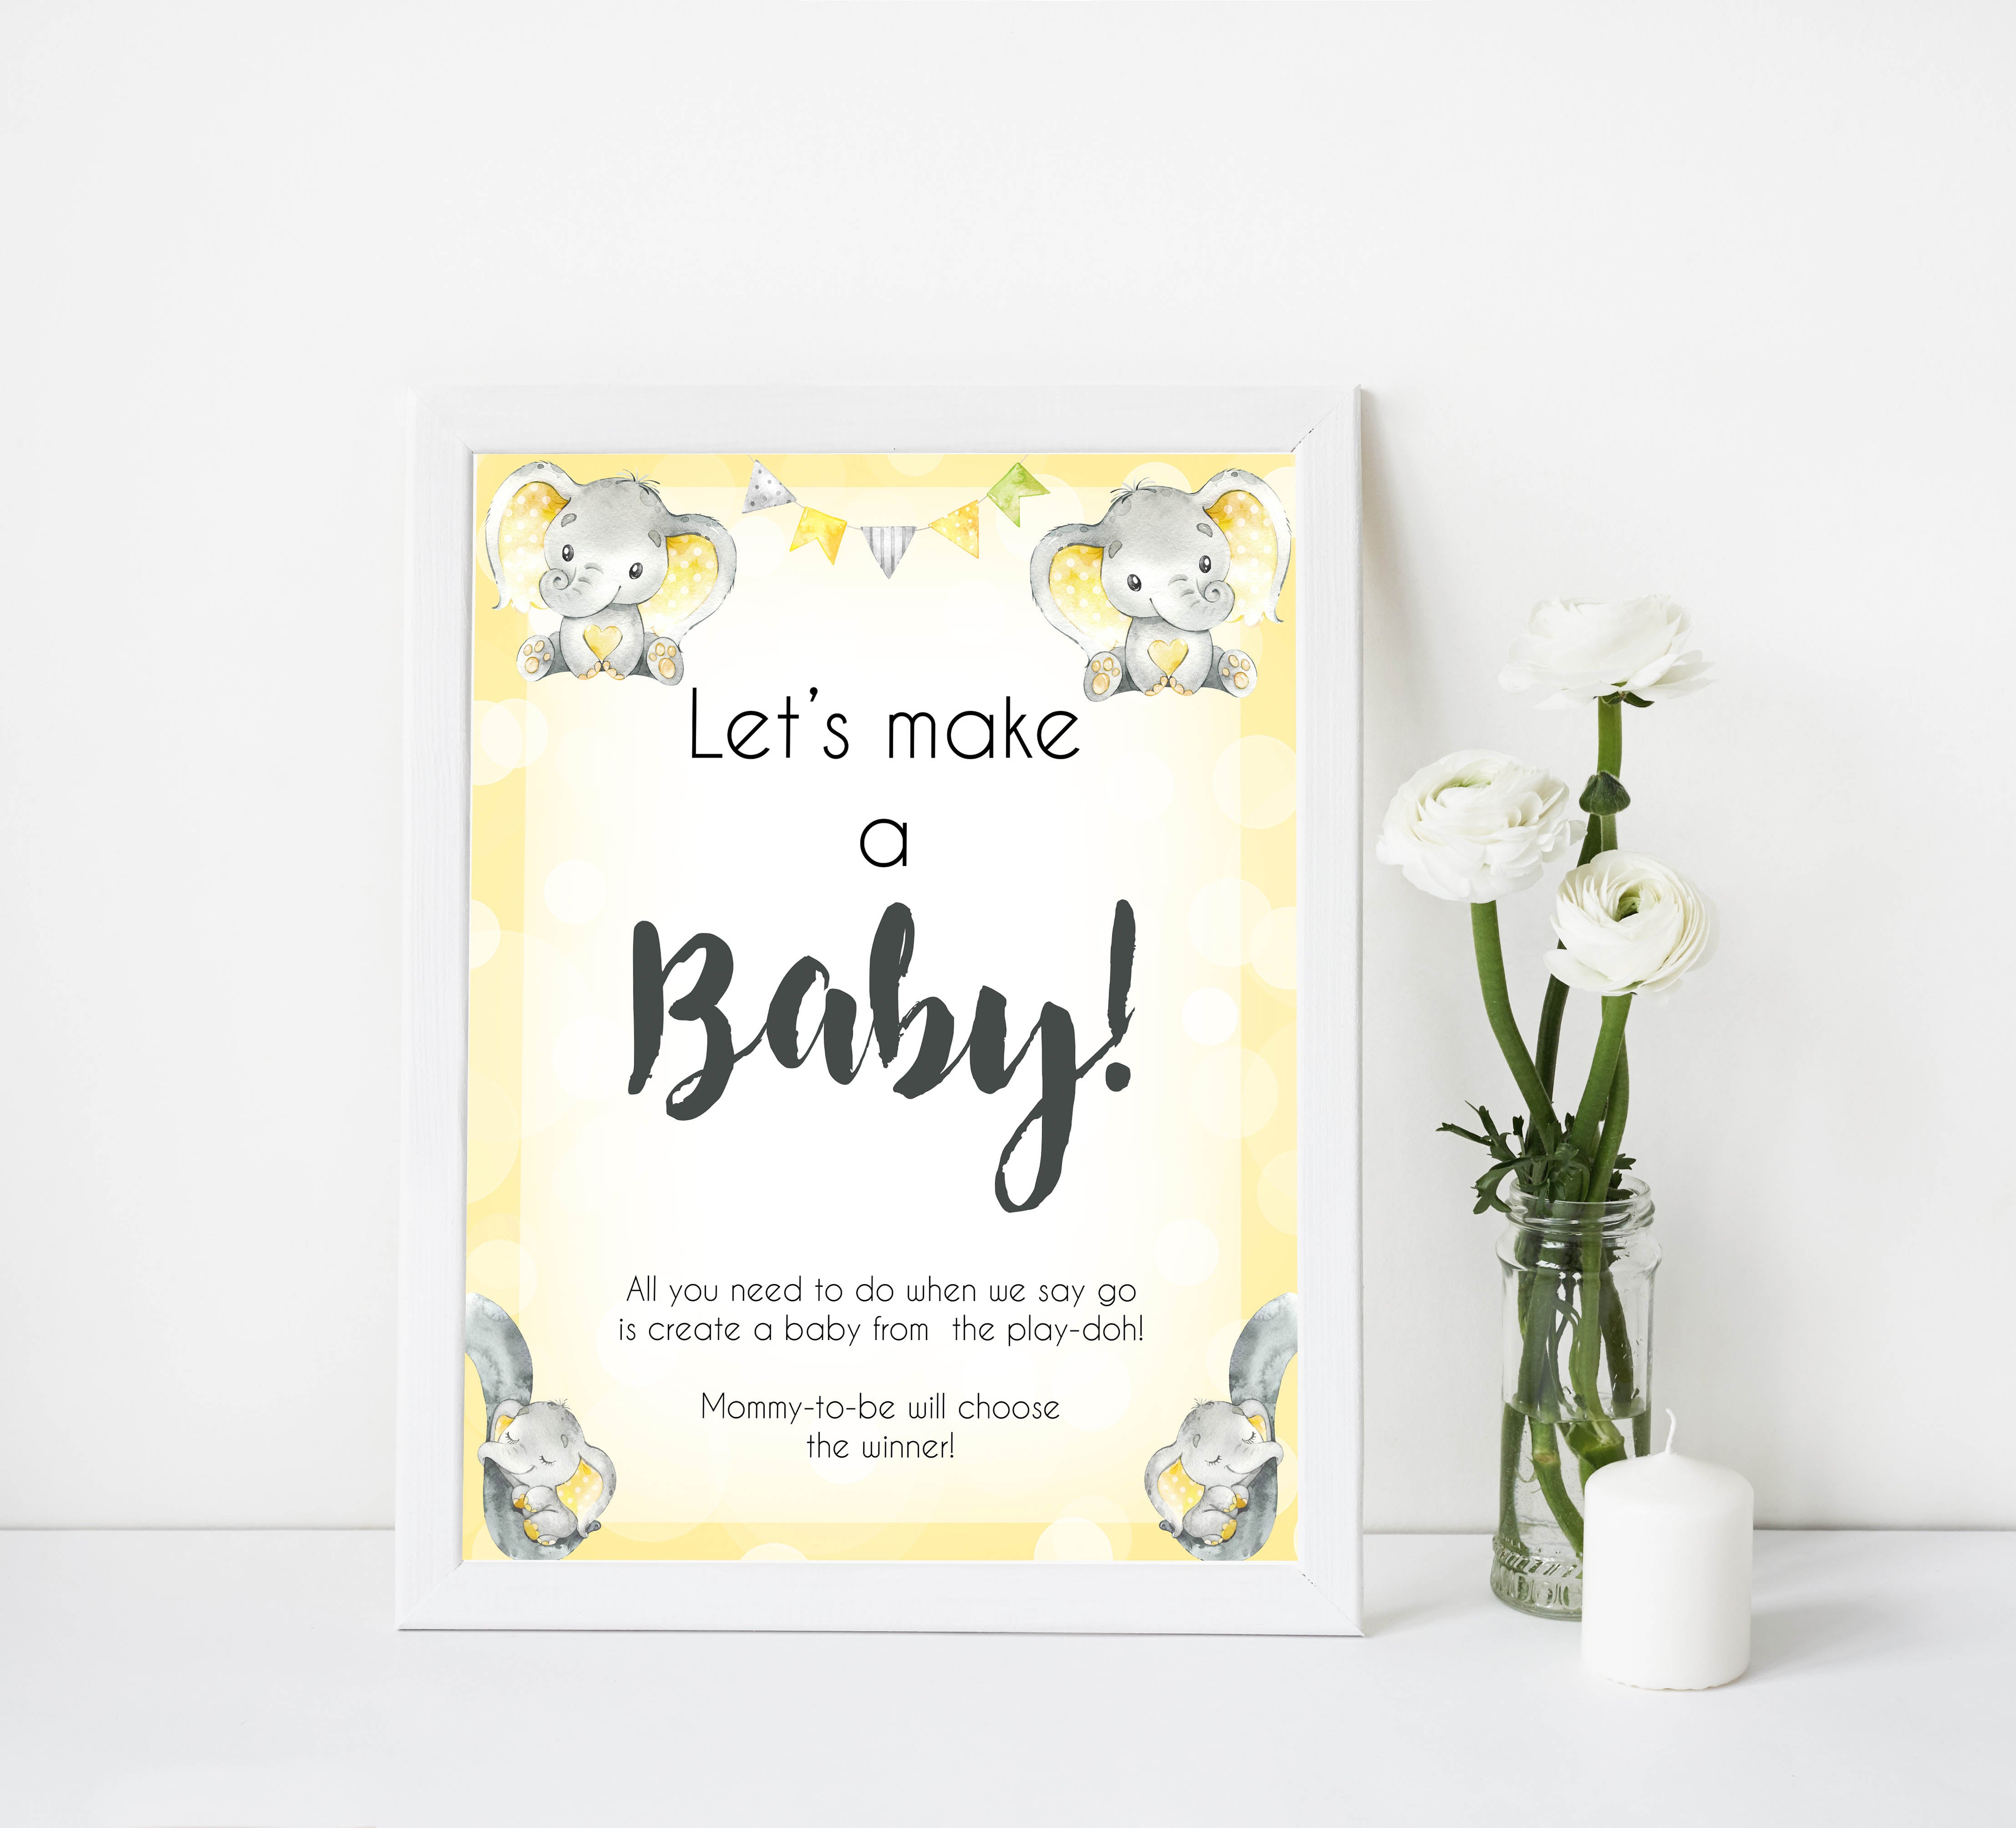 lets make a baby game, Printable baby shower games, fun baby games, baby shower games, fun baby shower ideas, top baby shower ideas, yellow elephant baby shower, blue baby shower ideas